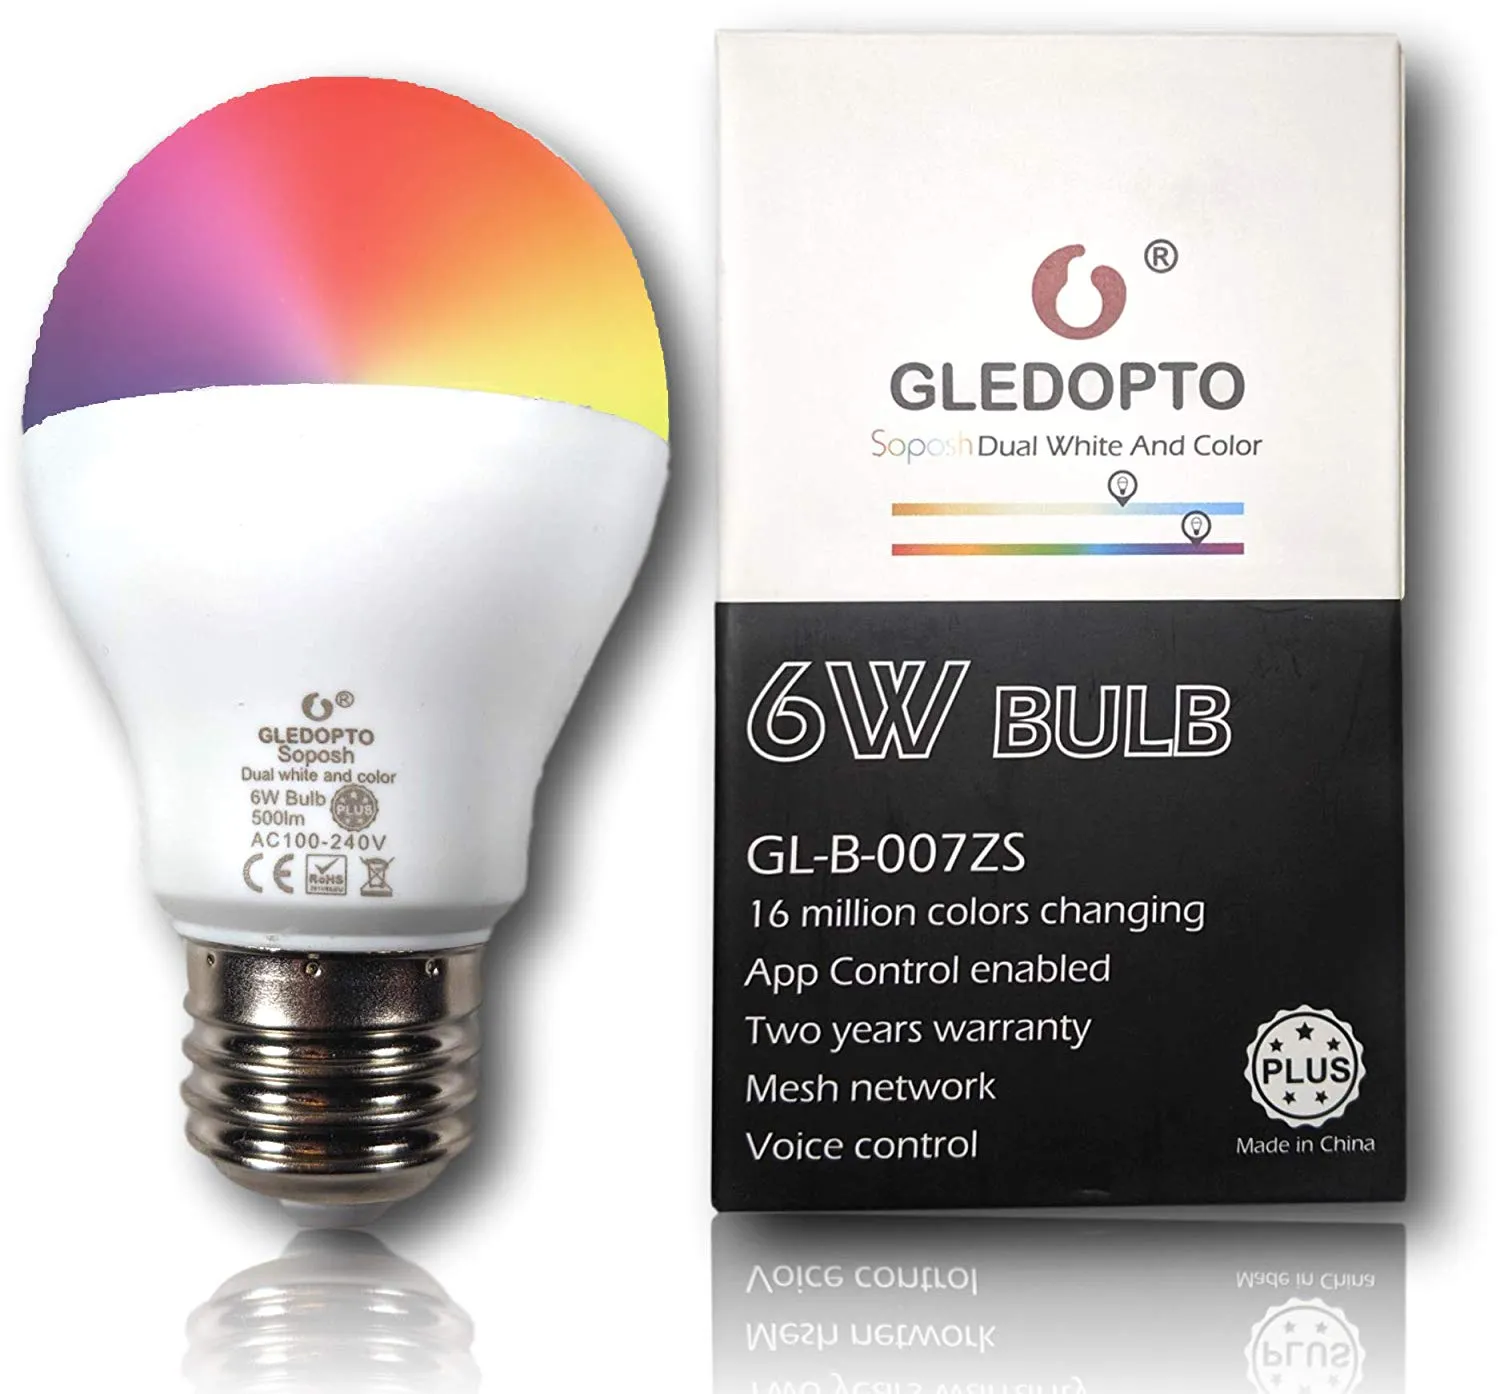 6W Dual White And Color Bulb Plus